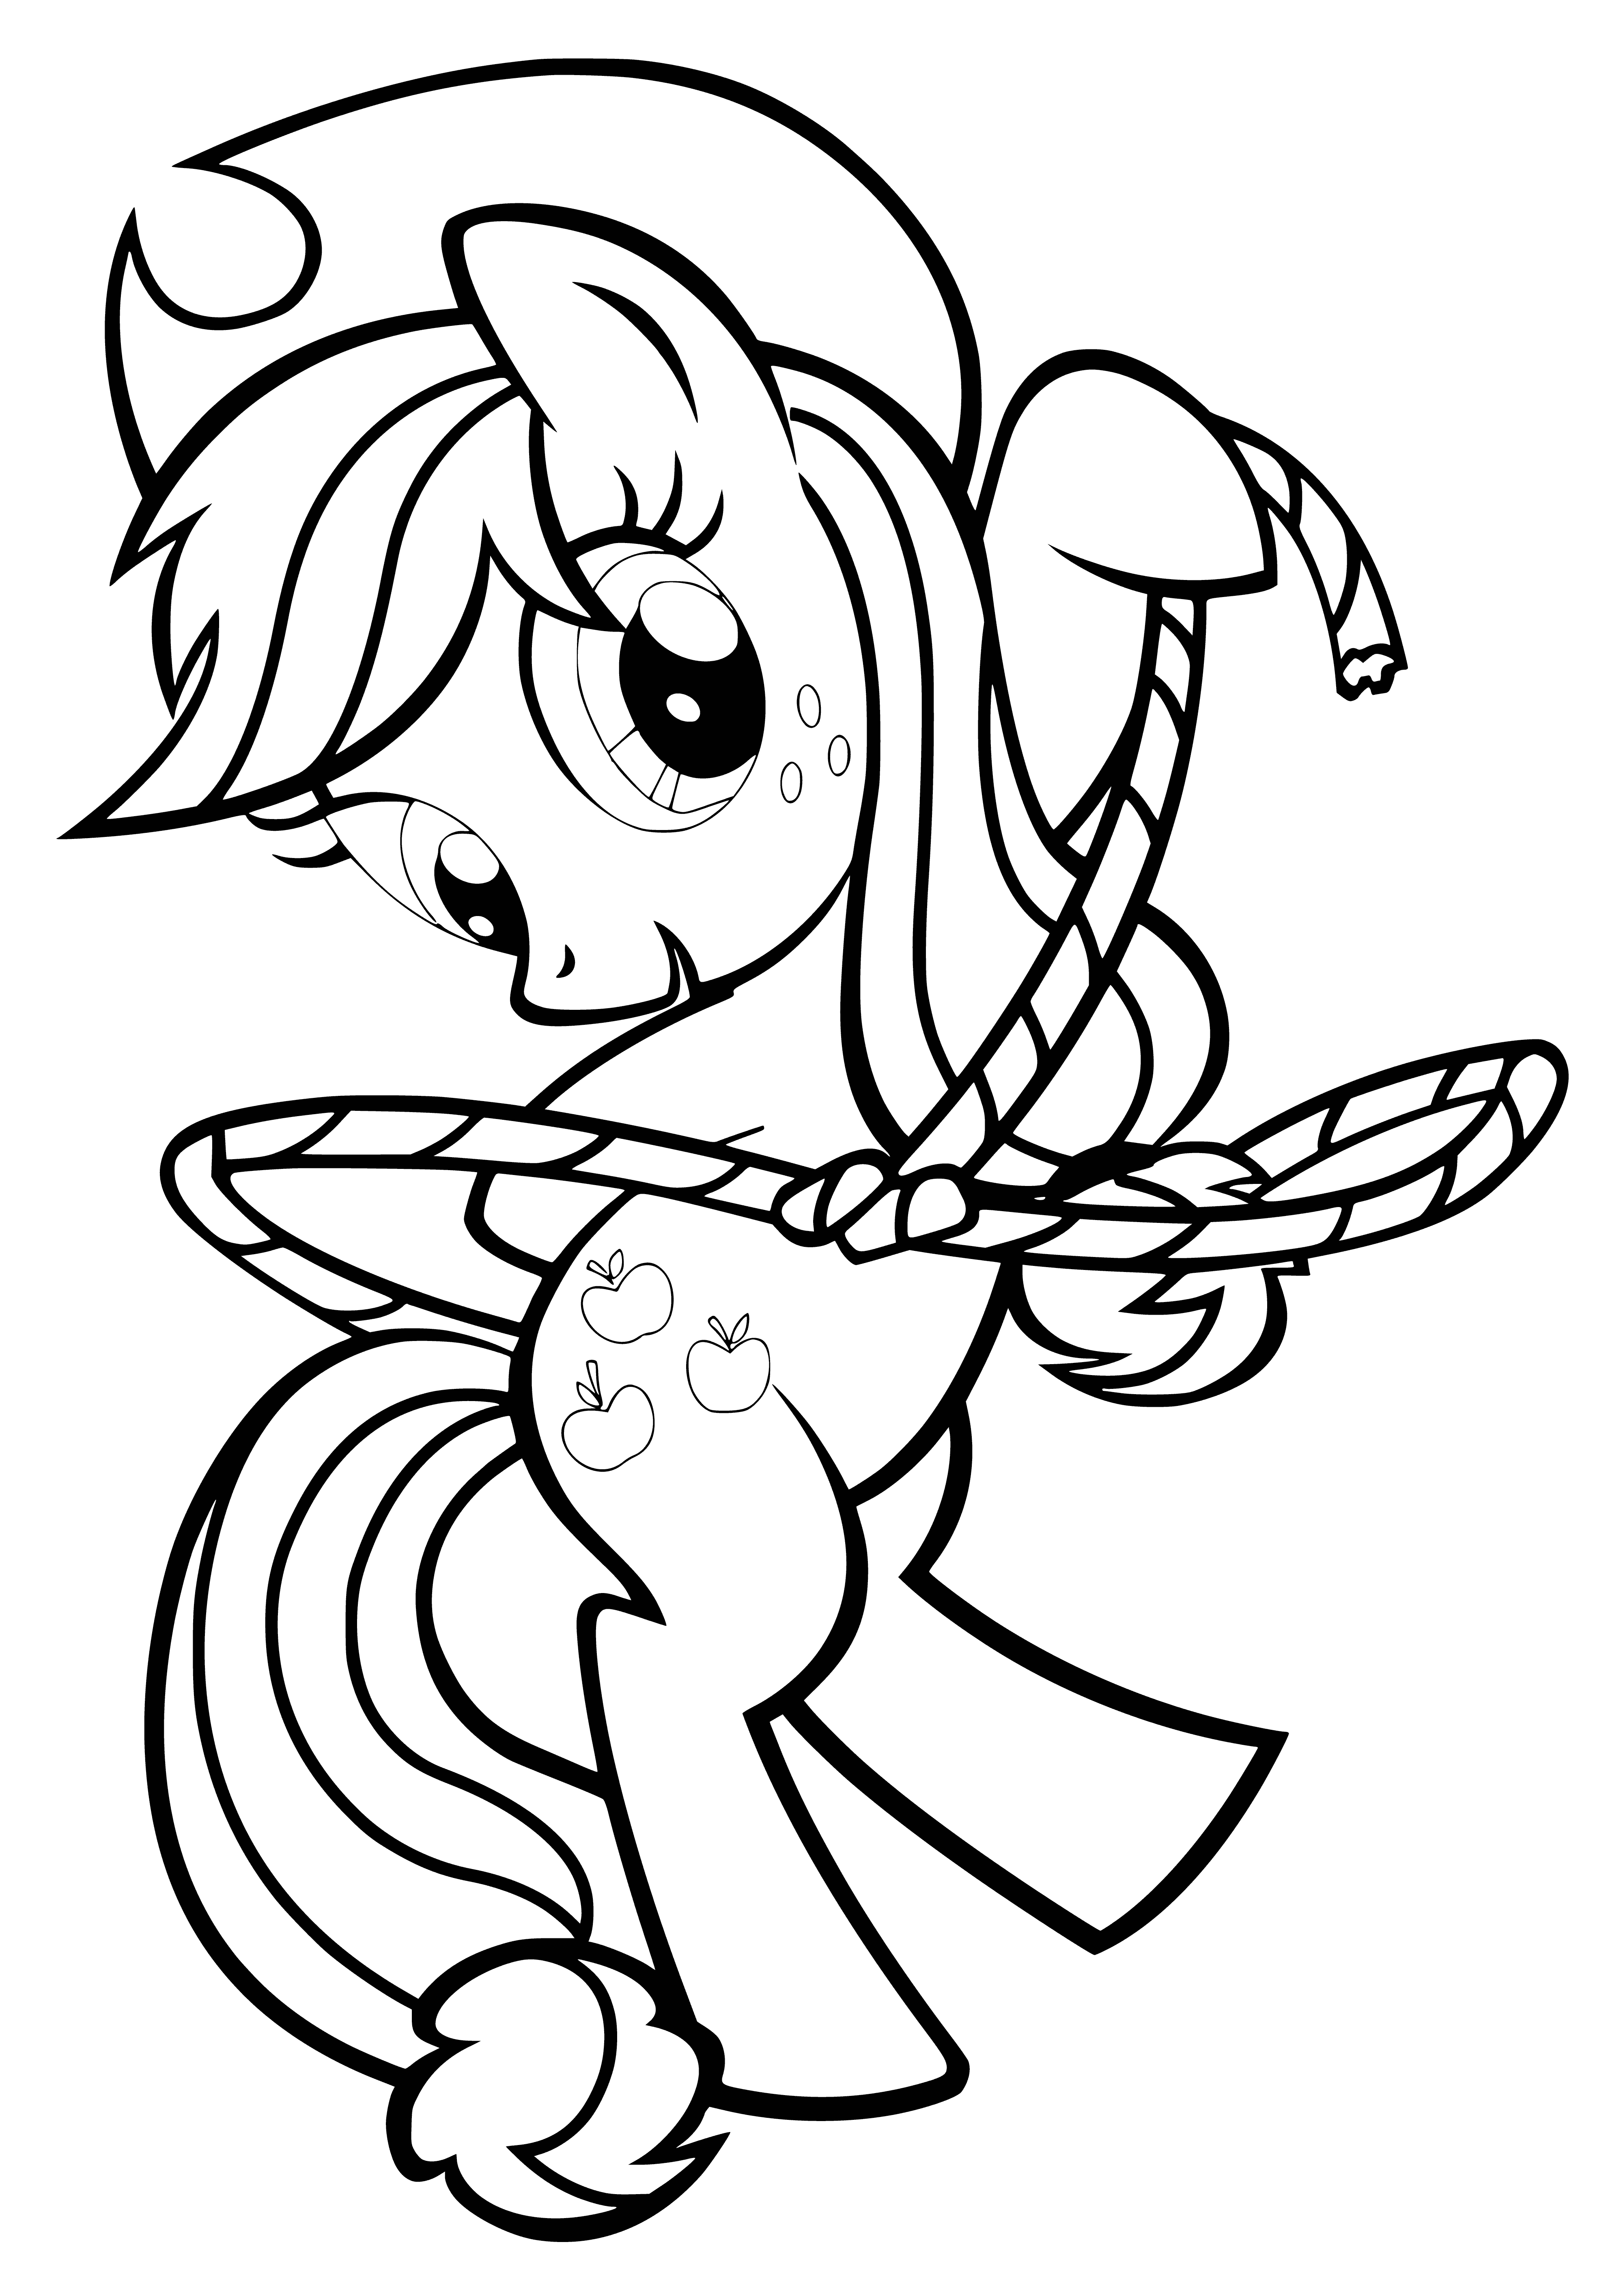 coloring page: Chubby pony with orange mane/tail and a green apple for a Cutie Mark.